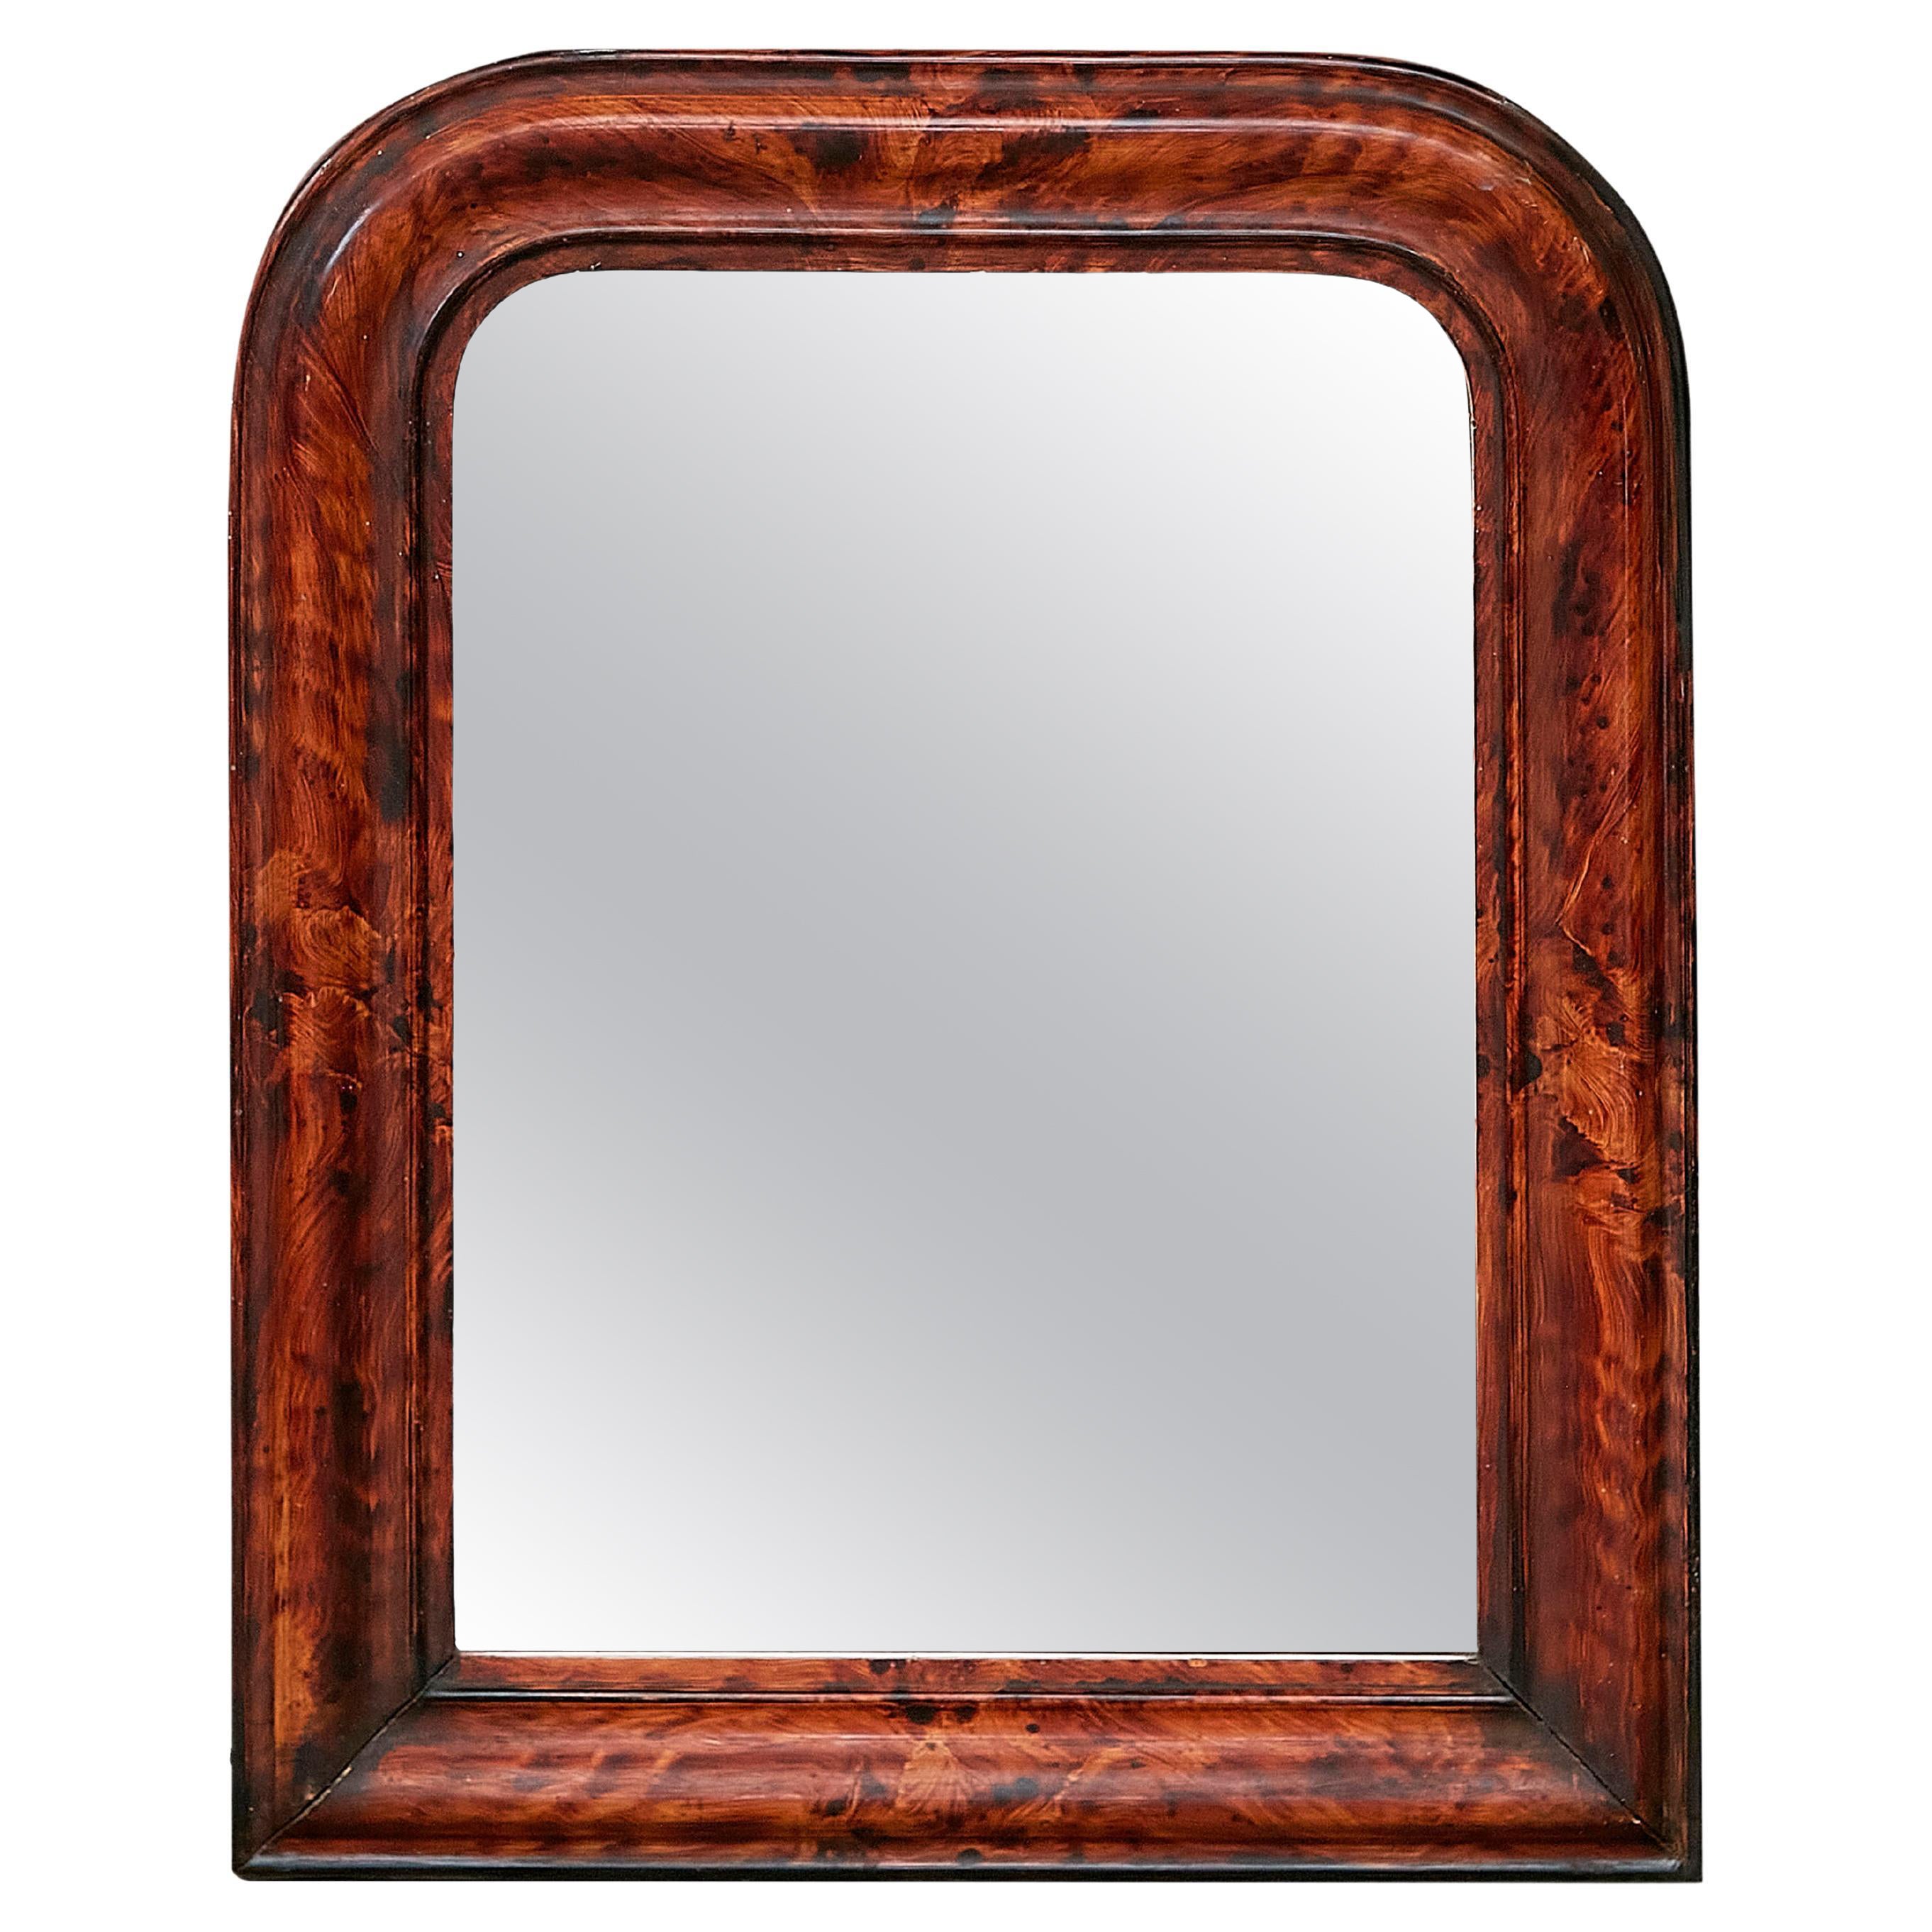 French 1900s Louis-Philippe Inspired Mirror with Faux Tortoise Painted Frame